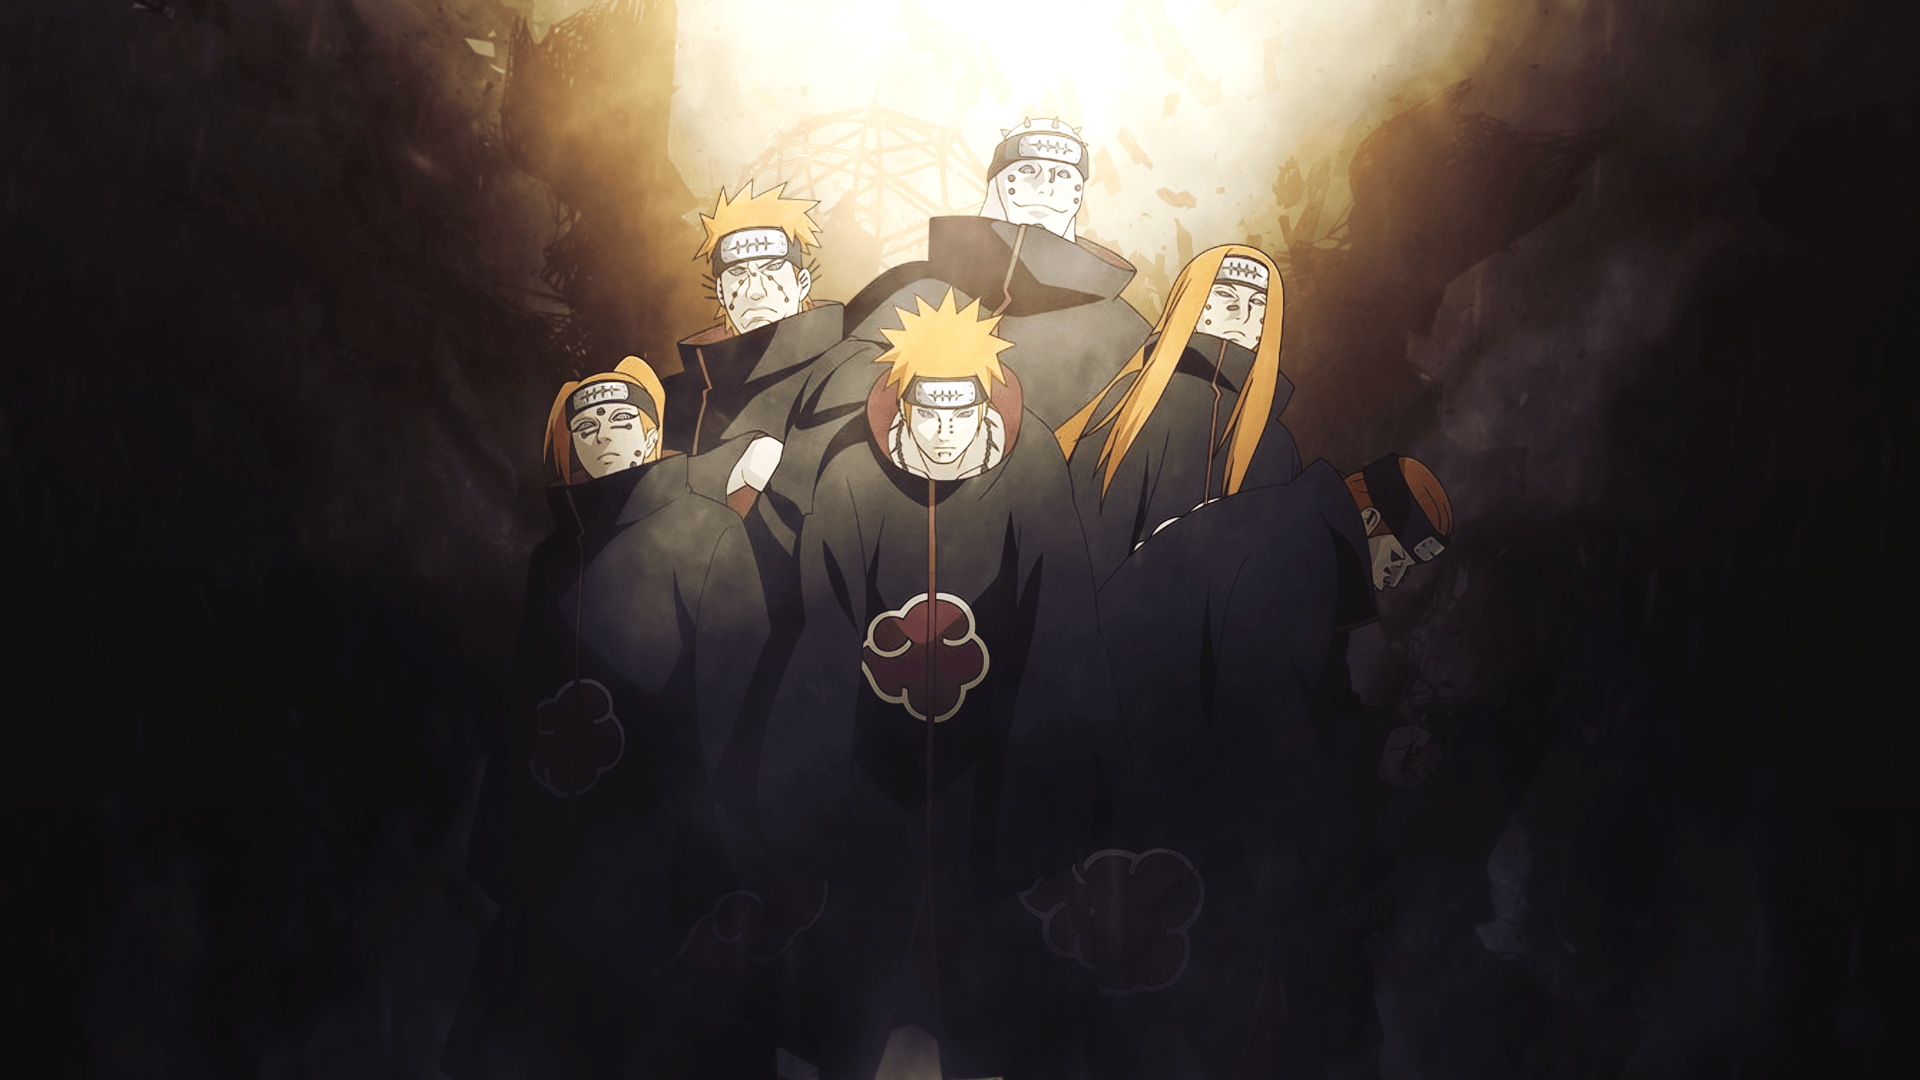 Six Paths of Pain Wallpaper. Six Paths of Pain Wallpaper, 6 Paths Pain Wallpaper and Obito Six Paths Wallpaper